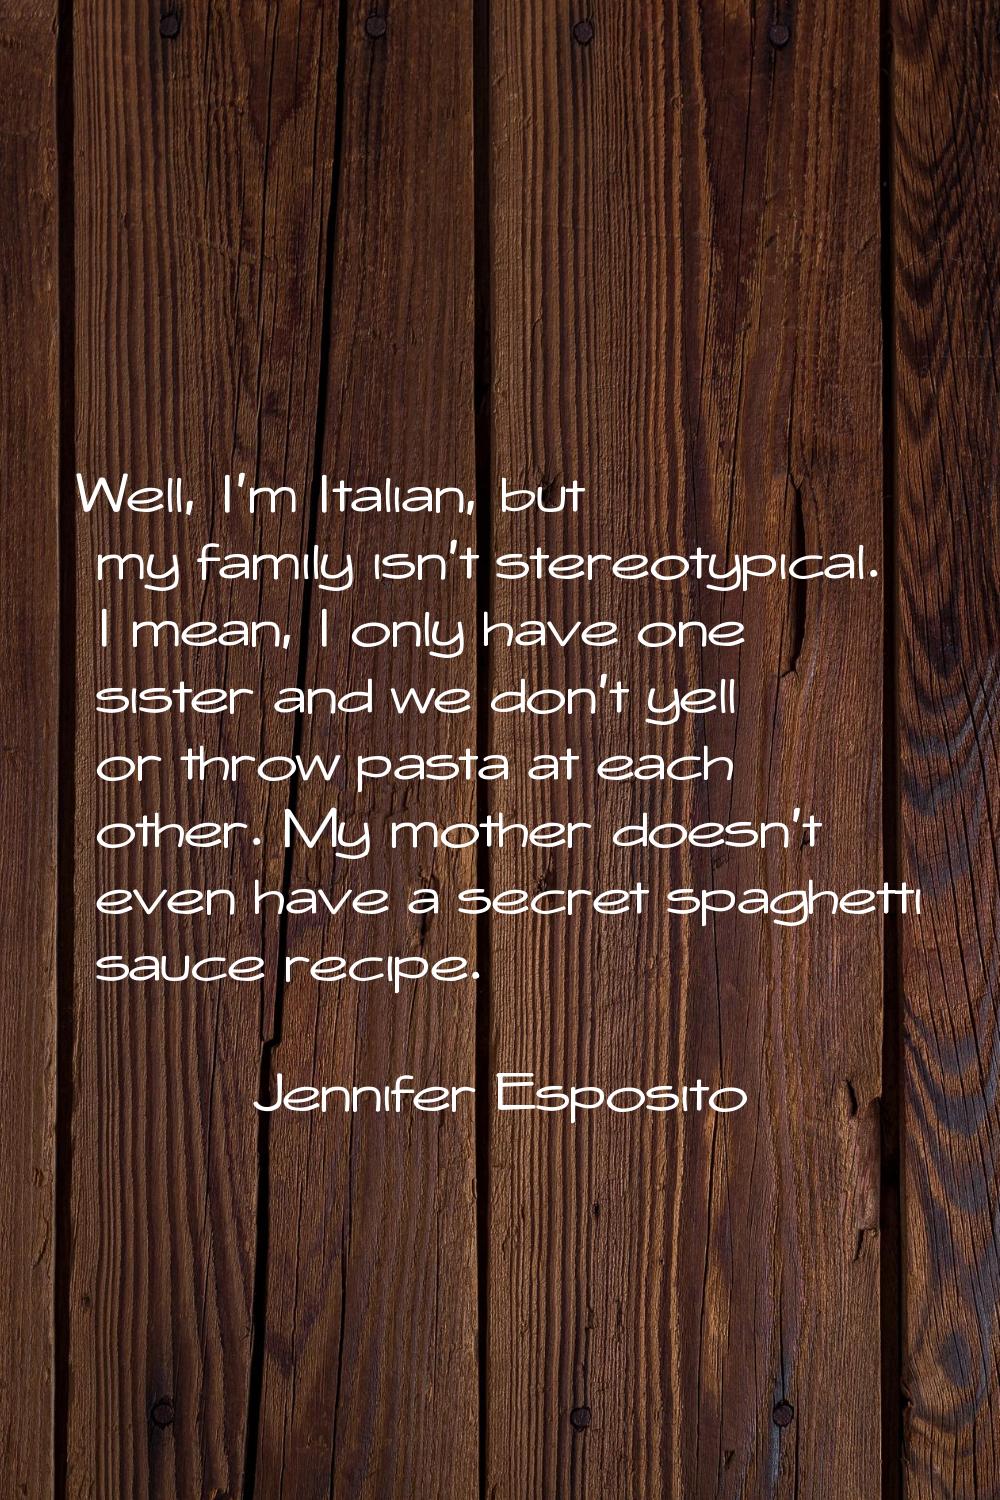 Well, I'm Italian, but my family isn't stereotypical. I mean, I only have one sister and we don't y